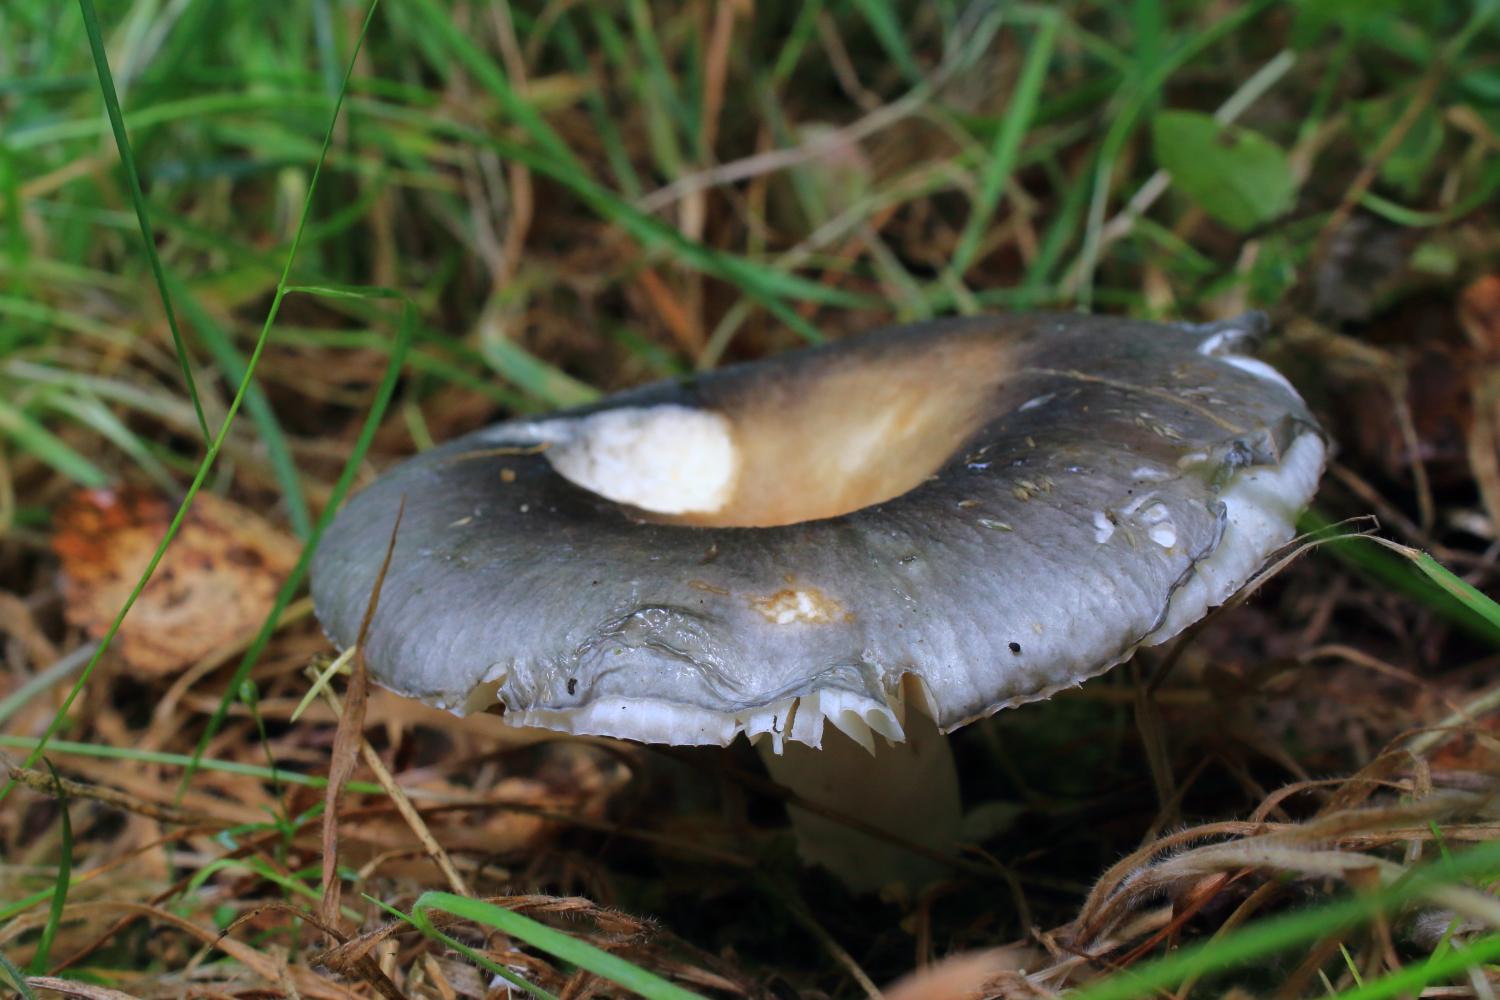 The peeling grey-green pileipellis covering the trama of this Powdery Brittlegill (Russula parazurea) offers protection from the elements and certain predators.